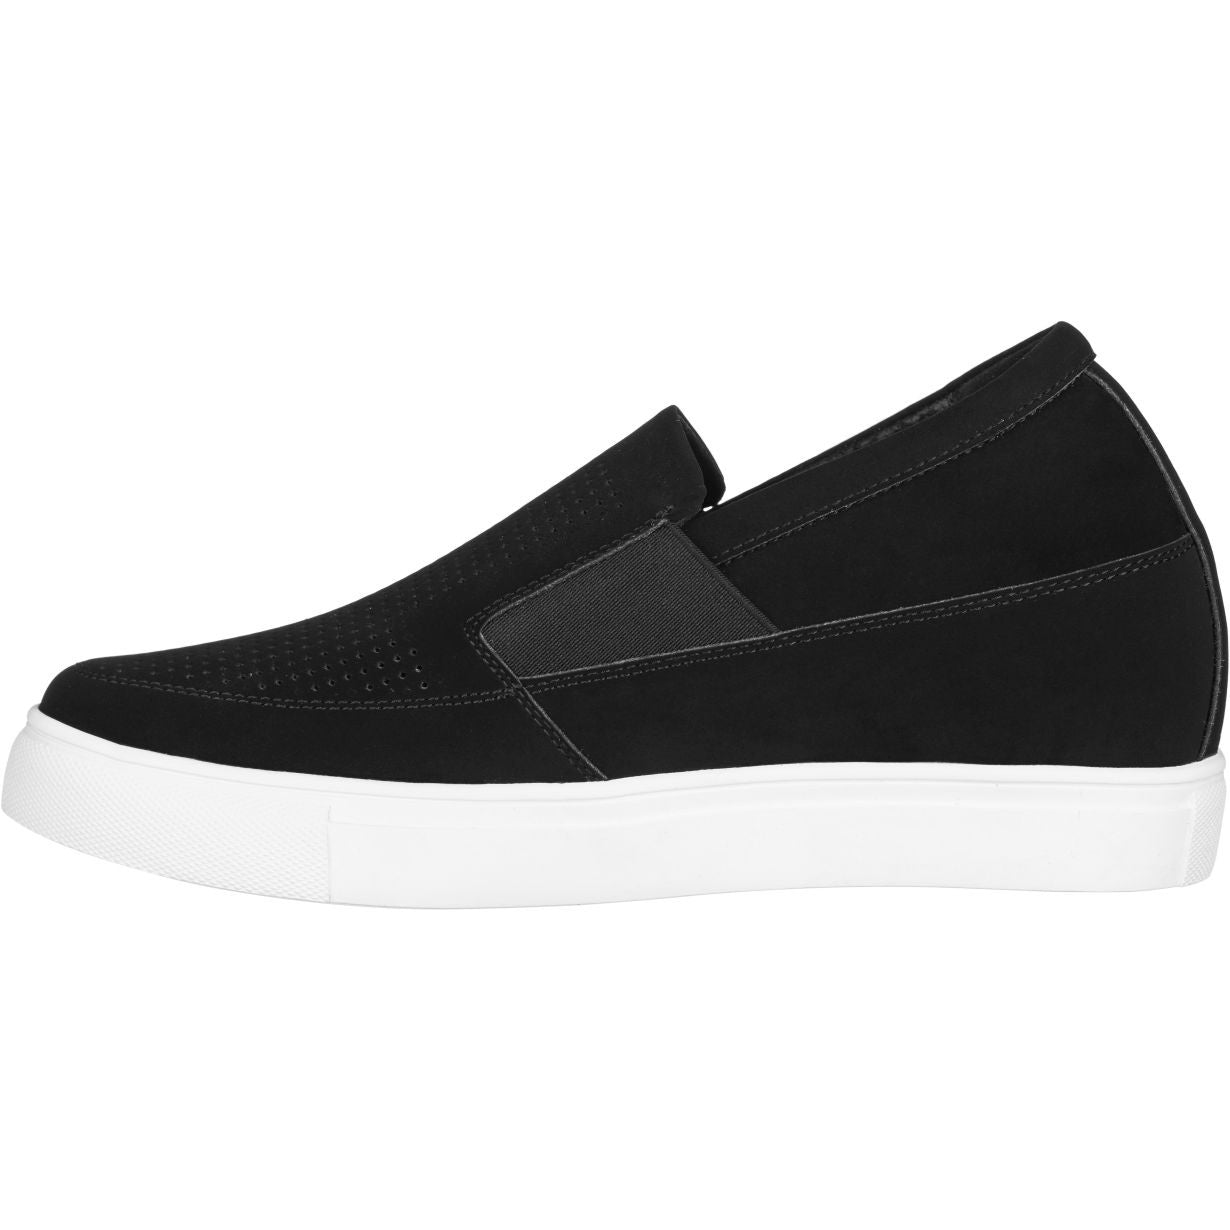 Elevator shoes height increase 3-Inch Taller Lightweight Slip-On Black CALTO Sneakers G63890